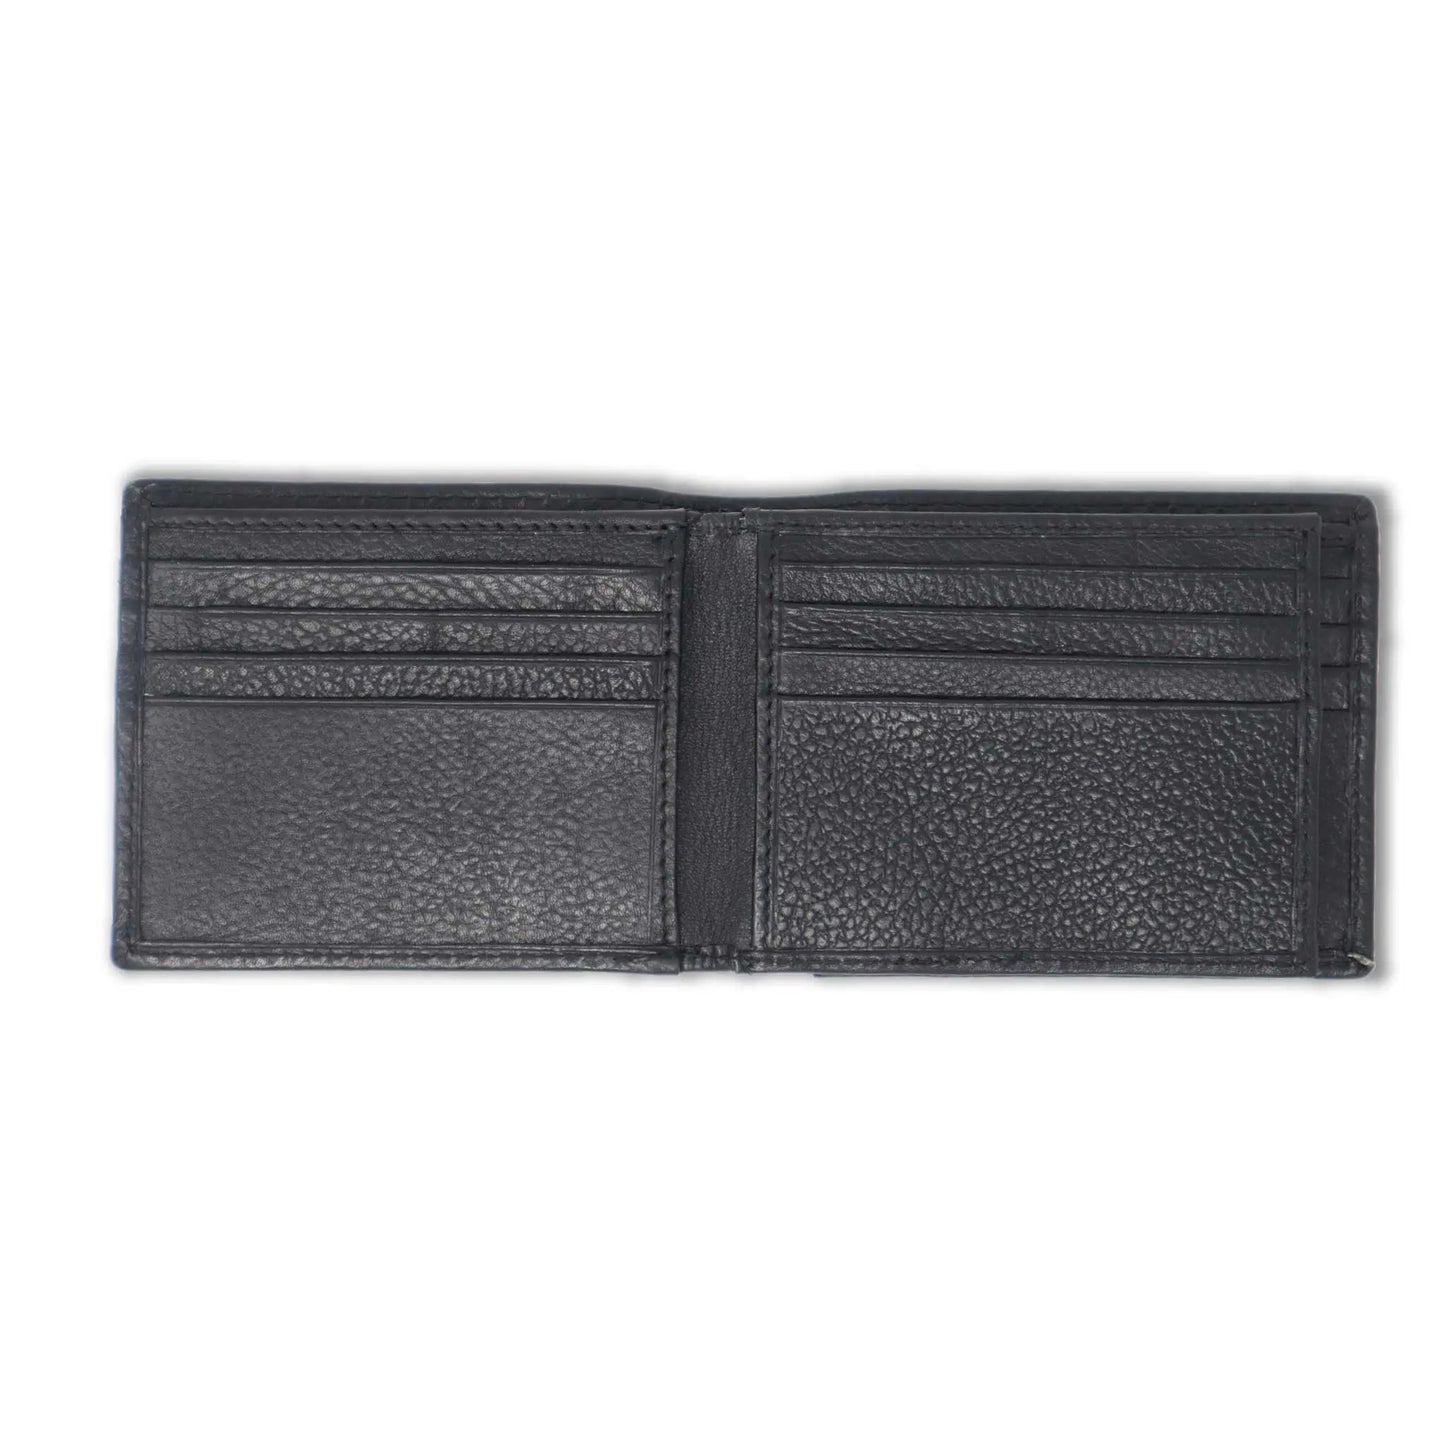 Simple Black Leather Wallet - Larimars Clothing Men's Formal and casual wear shirts